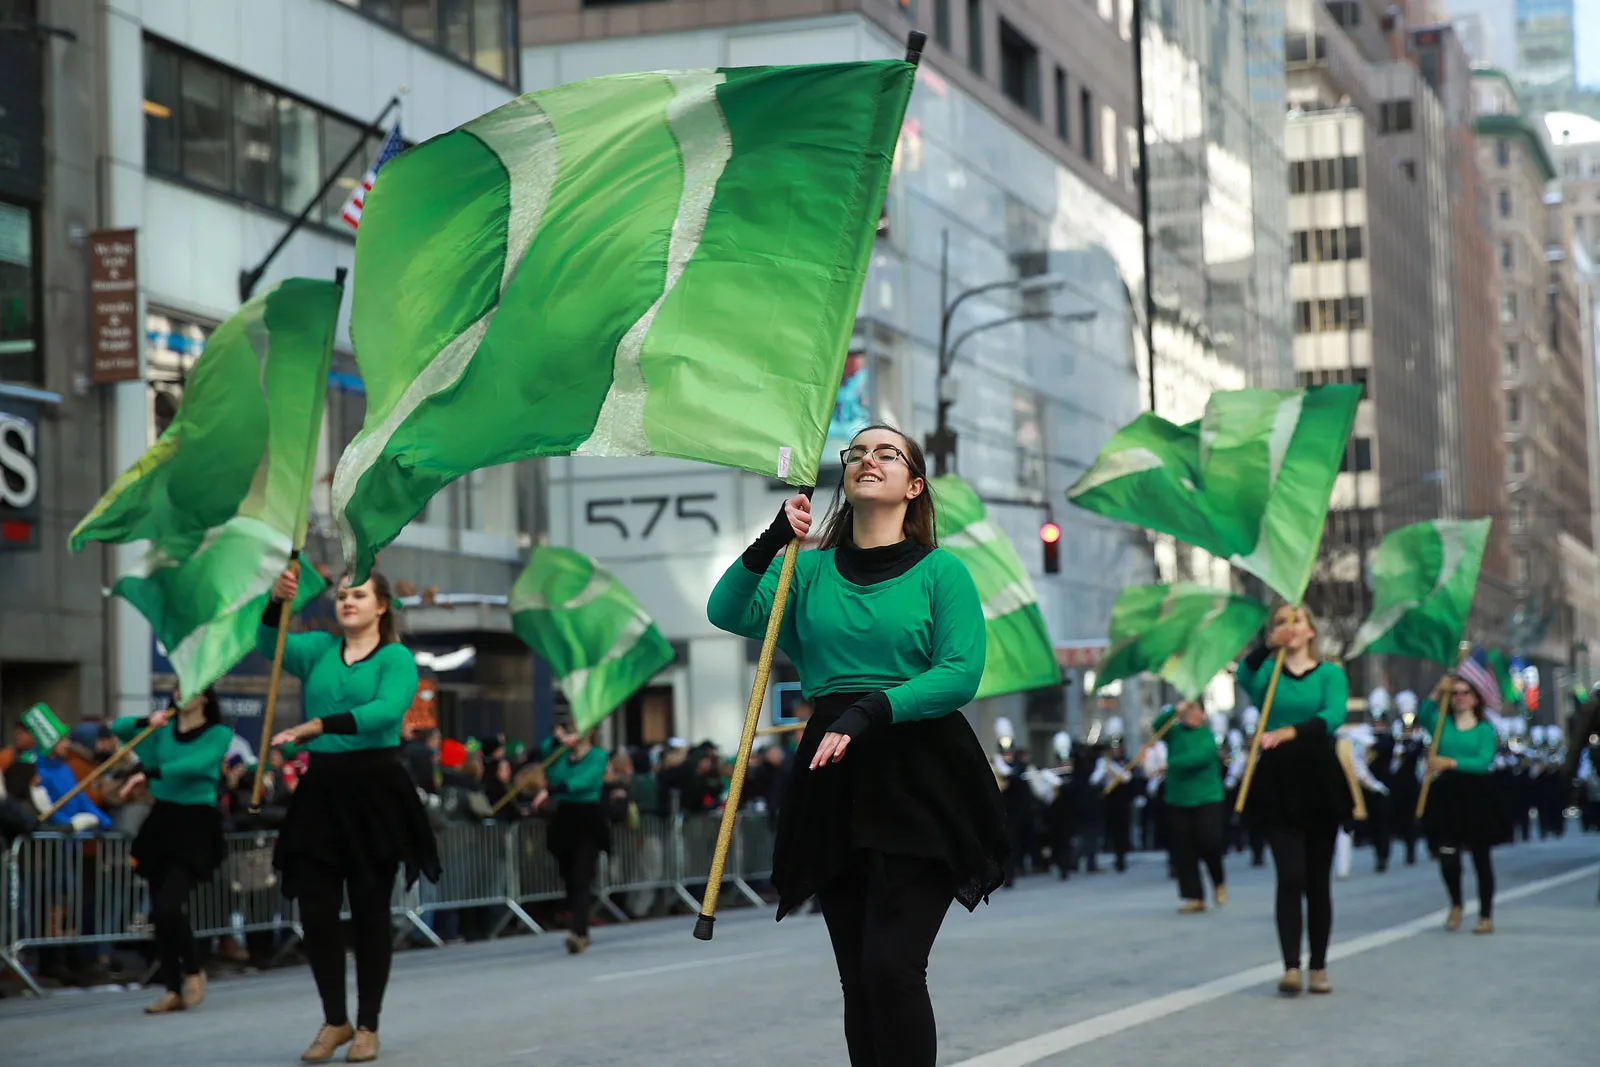 19-facts-about-st-patricks-day-parade